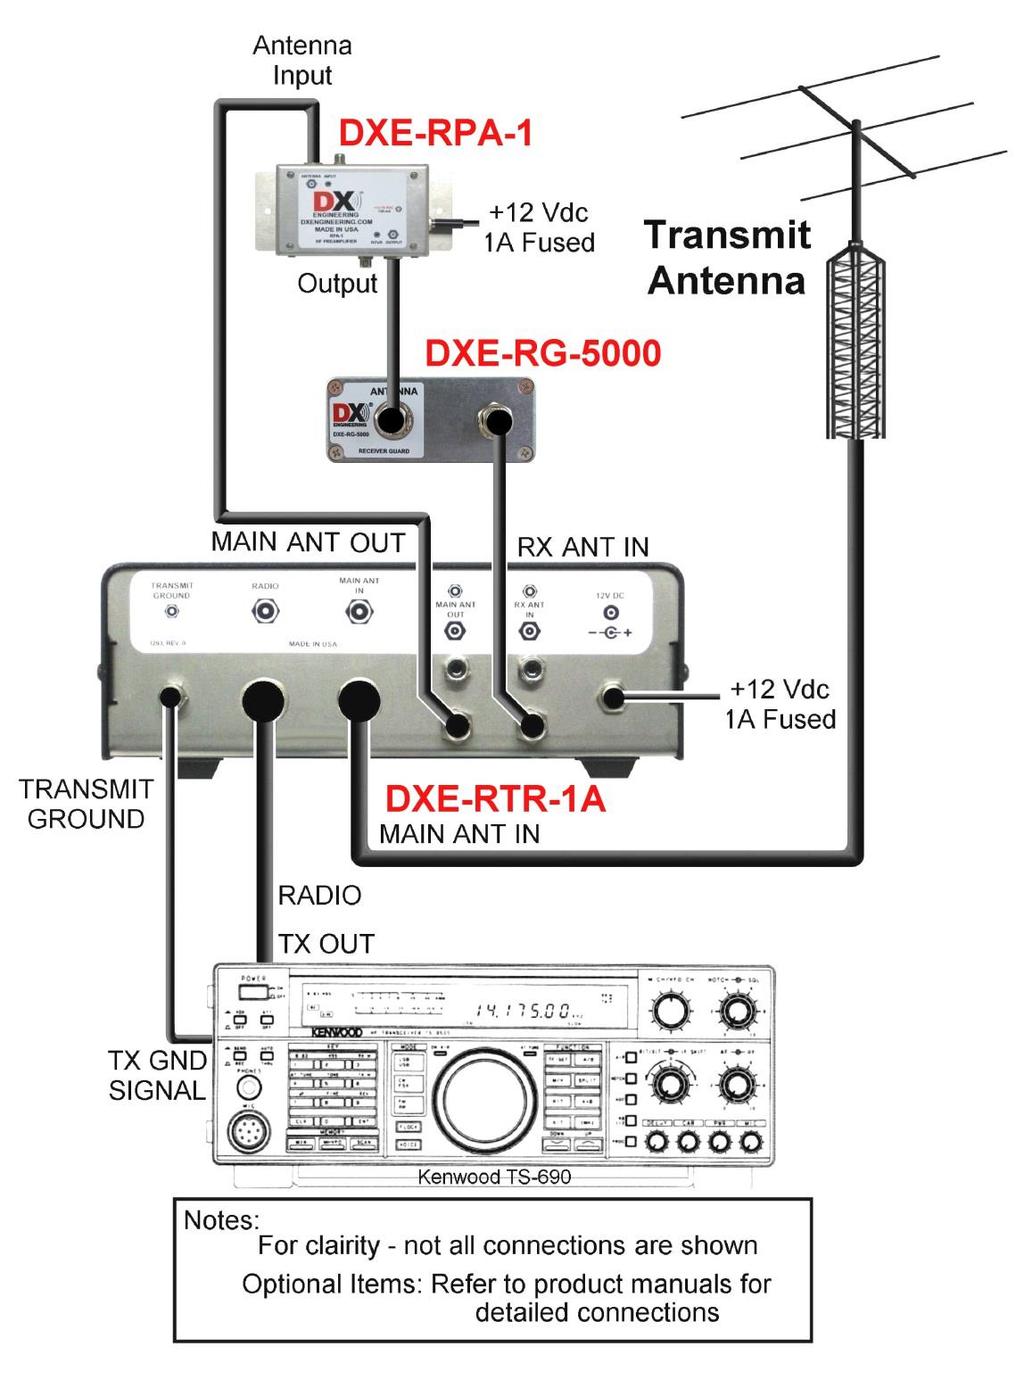 Figure 10 - Adding the DXE-RG-5000 Receiver Guard to a transceiver without separate RX input and using one antenna for Transmit and Receive Figure 10 shows the DXE-RG-5000 Receiver Guard being used